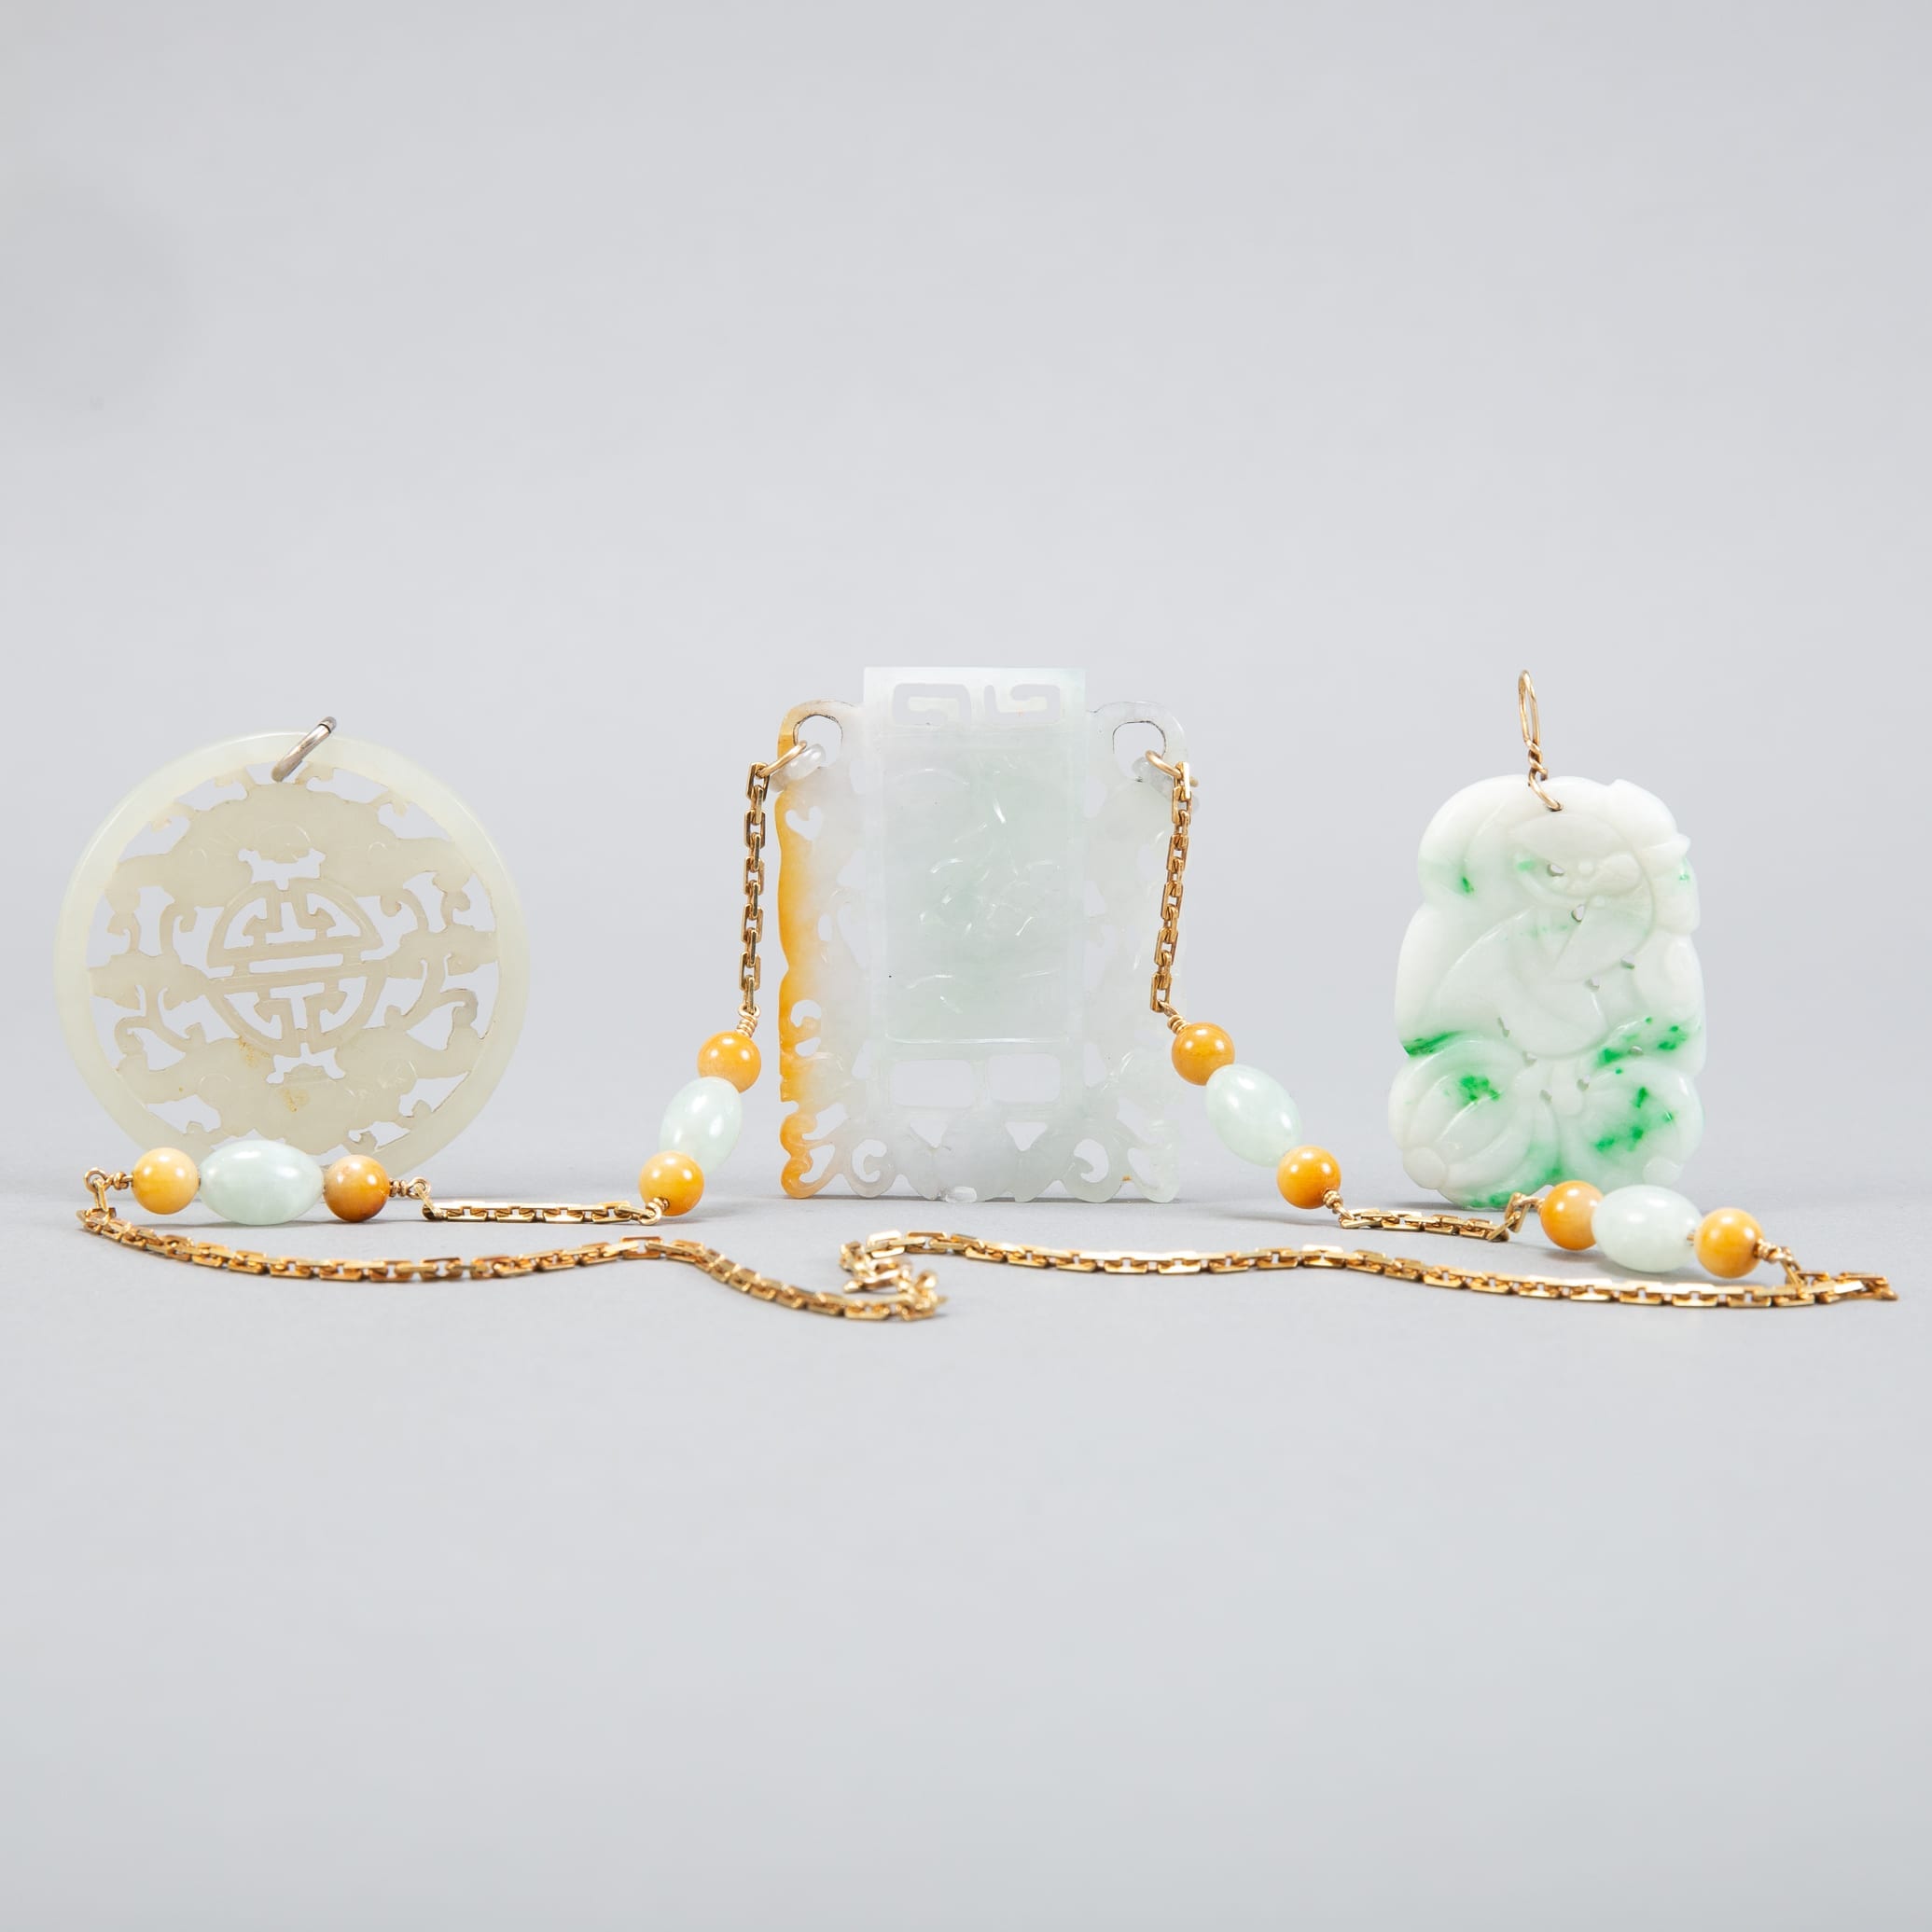 Lot 202: Grp:3 20th c. Chinese Pale Jade Pendants - Gold